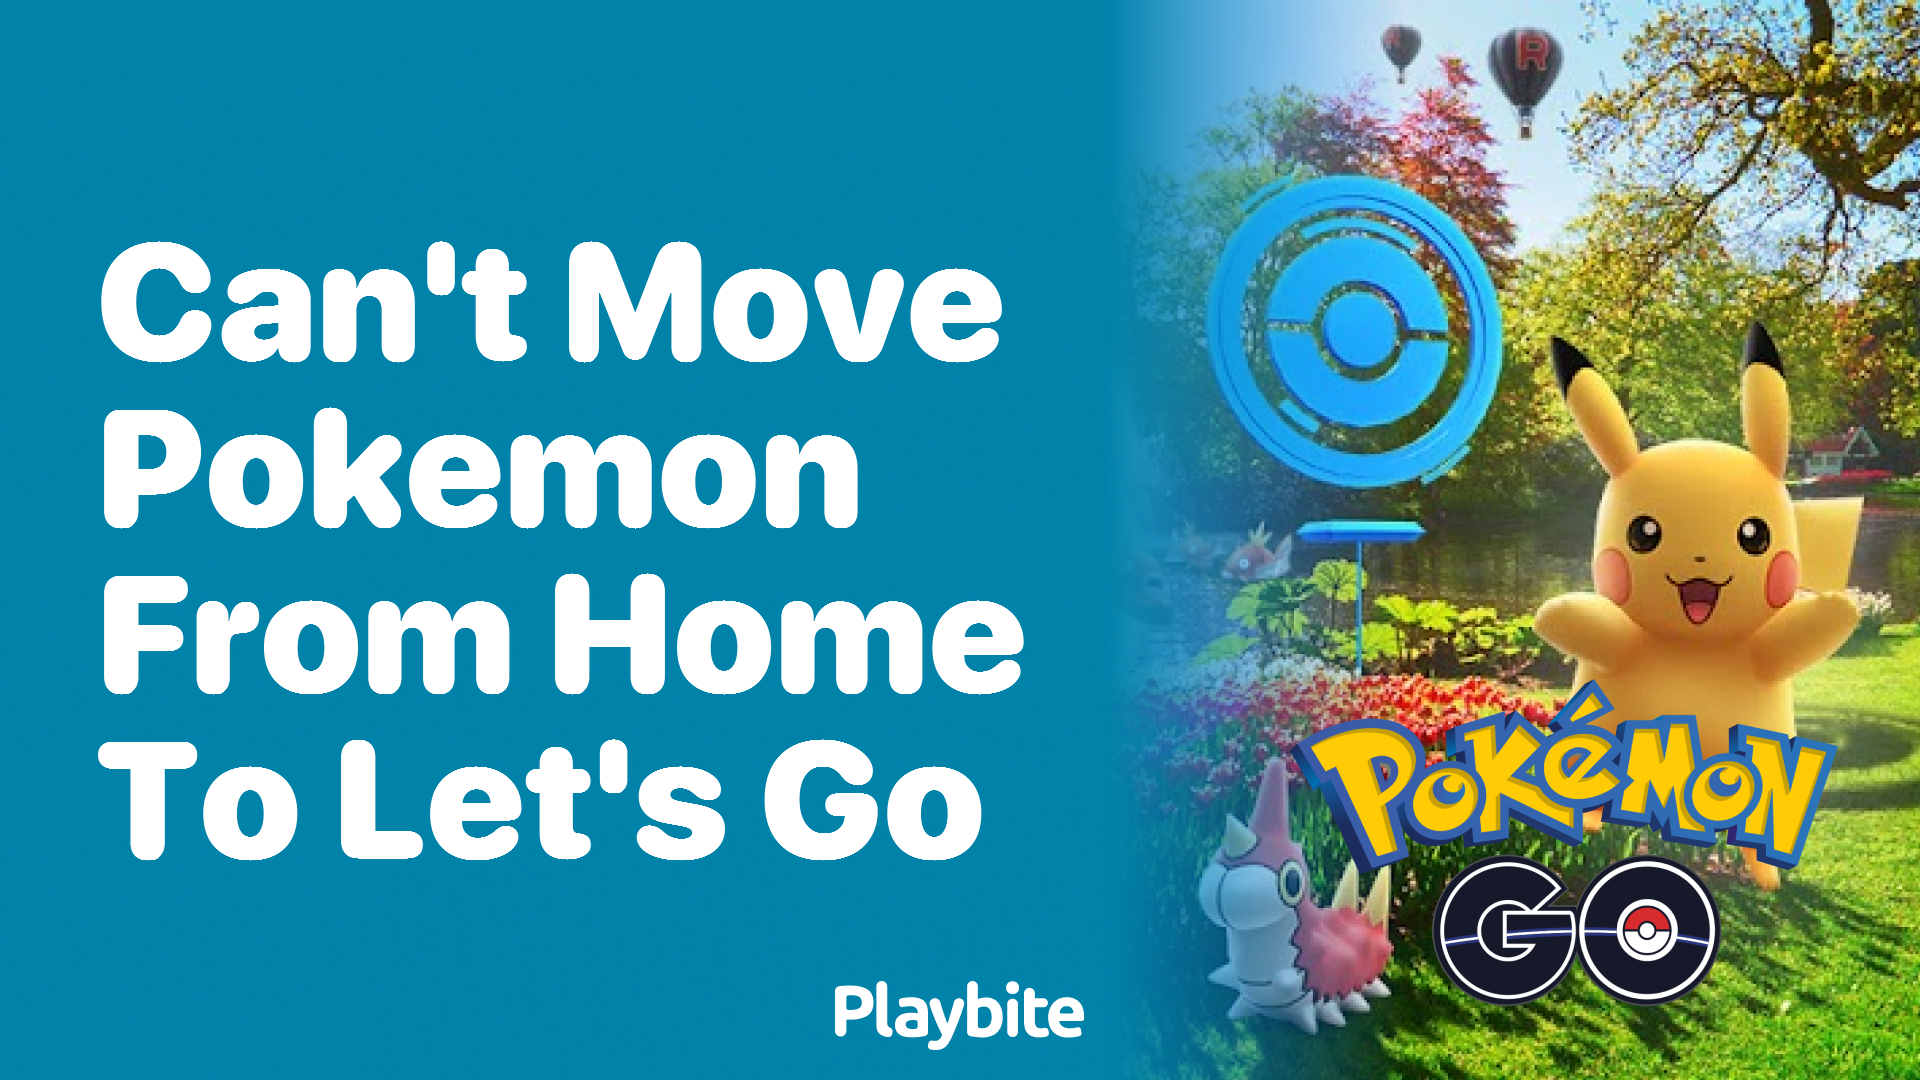 Can't Catch Pokemon in Pokemon GO? Here's Why! - Playbite